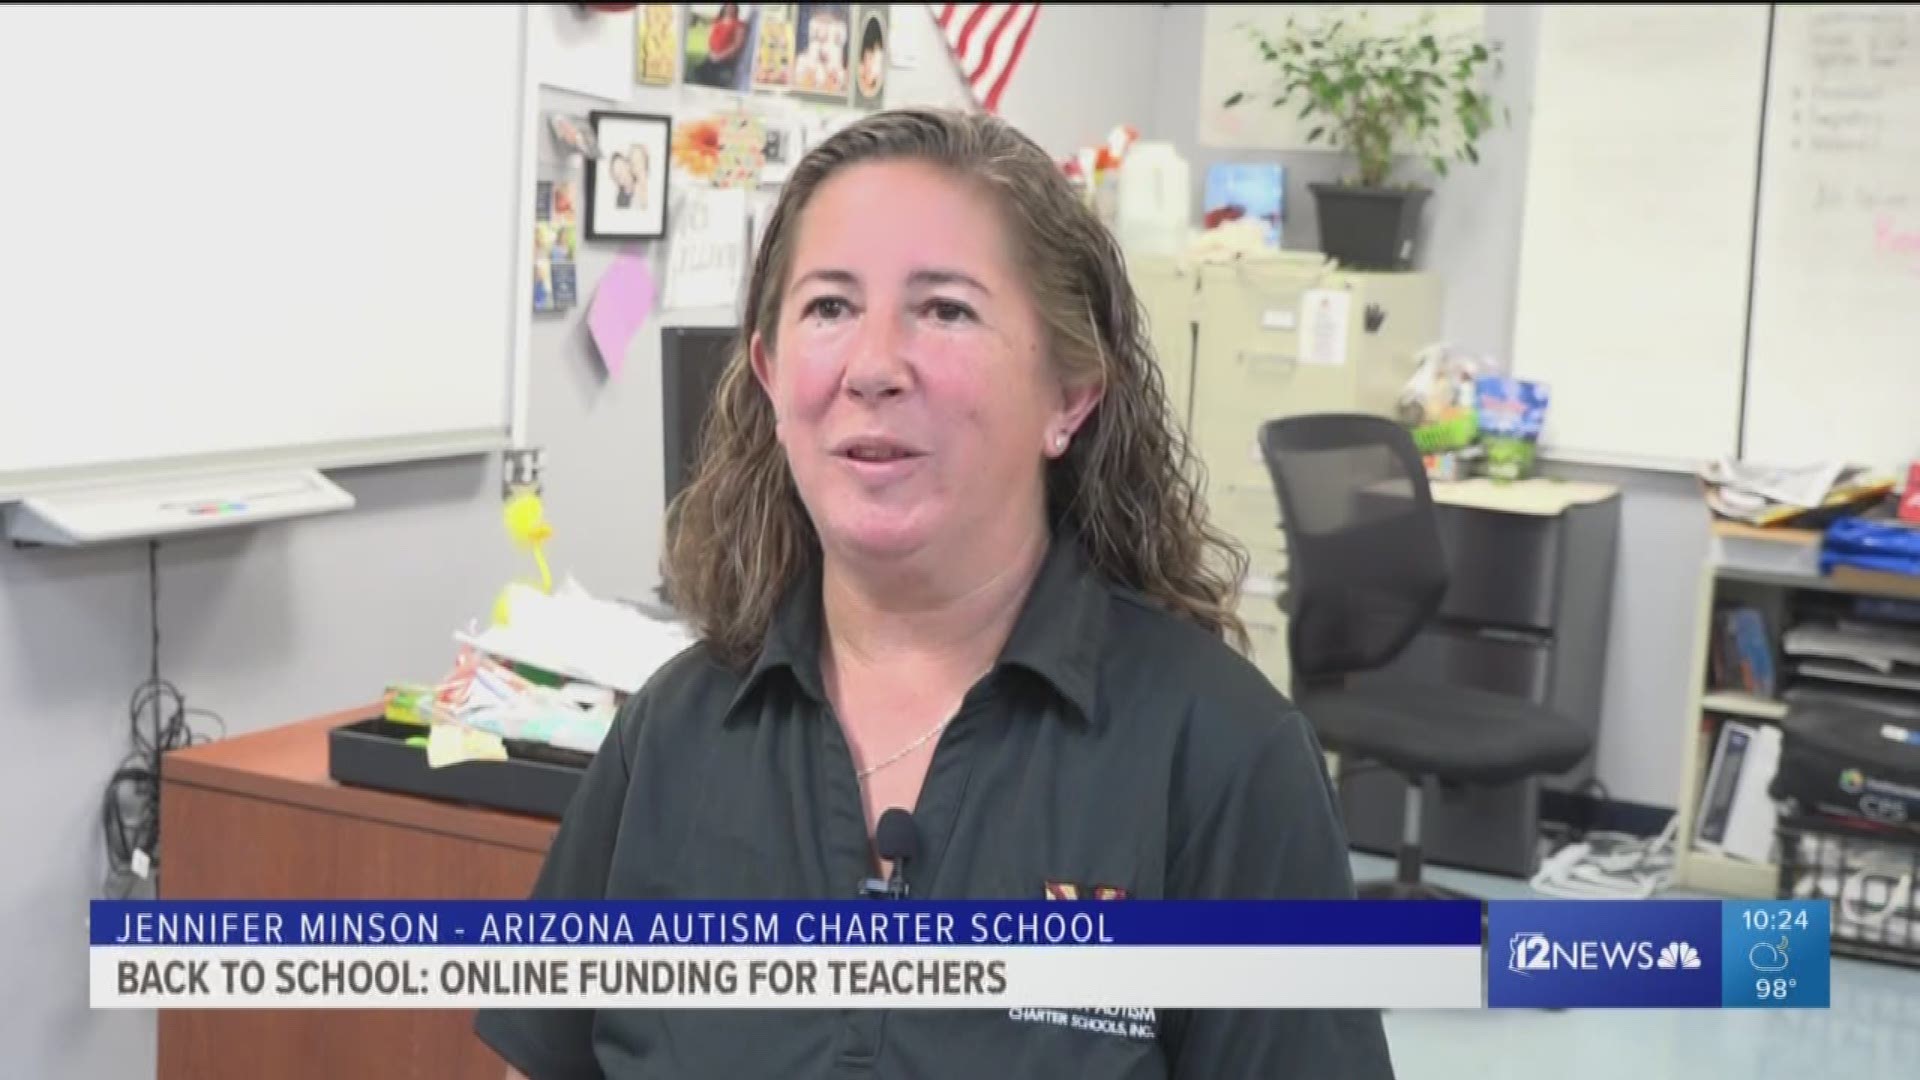 The company says donors, the majority of who are out-of-state, have given 9,000 Arizona teachers more than $12 million over the last decade.